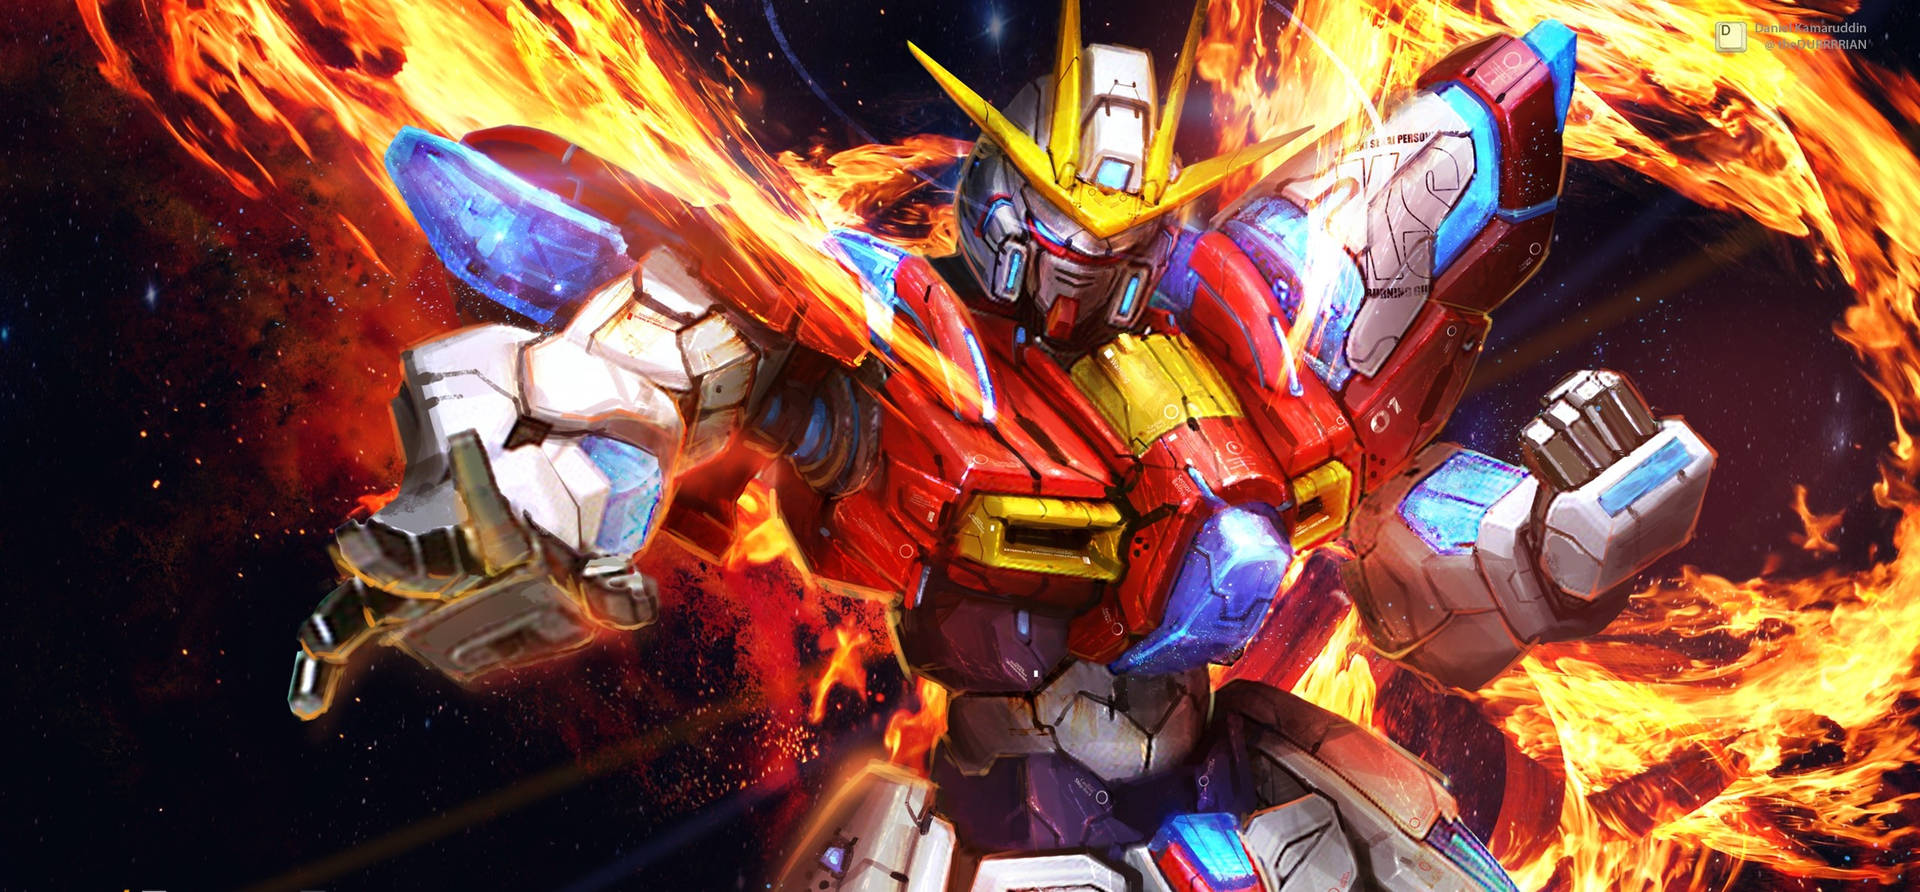 Fiery Background Of Mobile Suit Gundam Wallpaper